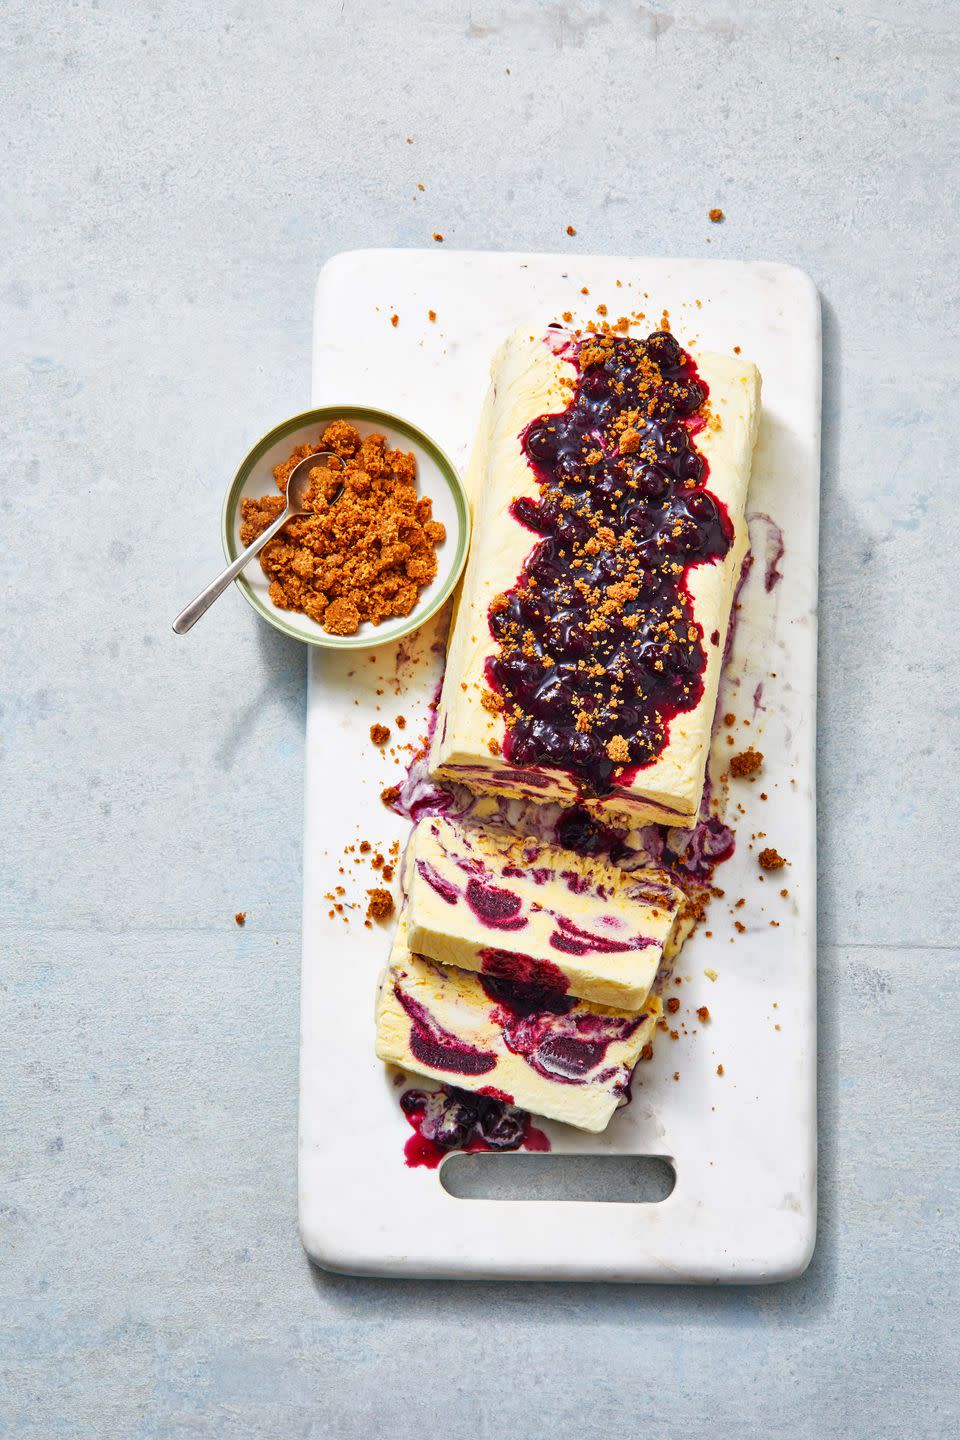 <p>Think of this frozen dessert like the soft-serve version of your favorite ice cream cake, with added tang from crème fraîche and crunch from the pecan crumble. <em>Yum.</em></p><p>Get the <strong><a href="https://www.goodhousekeeping.com/food-recipes/a36663530/semifreddo-with-berries-recipe/" rel="nofollow noopener" target="_blank" data-ylk="slk:Blueberry Crème Fraîche Semifreddo With Pecan Crumble recipe" class="link ">Blueberry Crème Fraîche Semifreddo With Pecan Crumble recipe</a></strong>.<br></p>